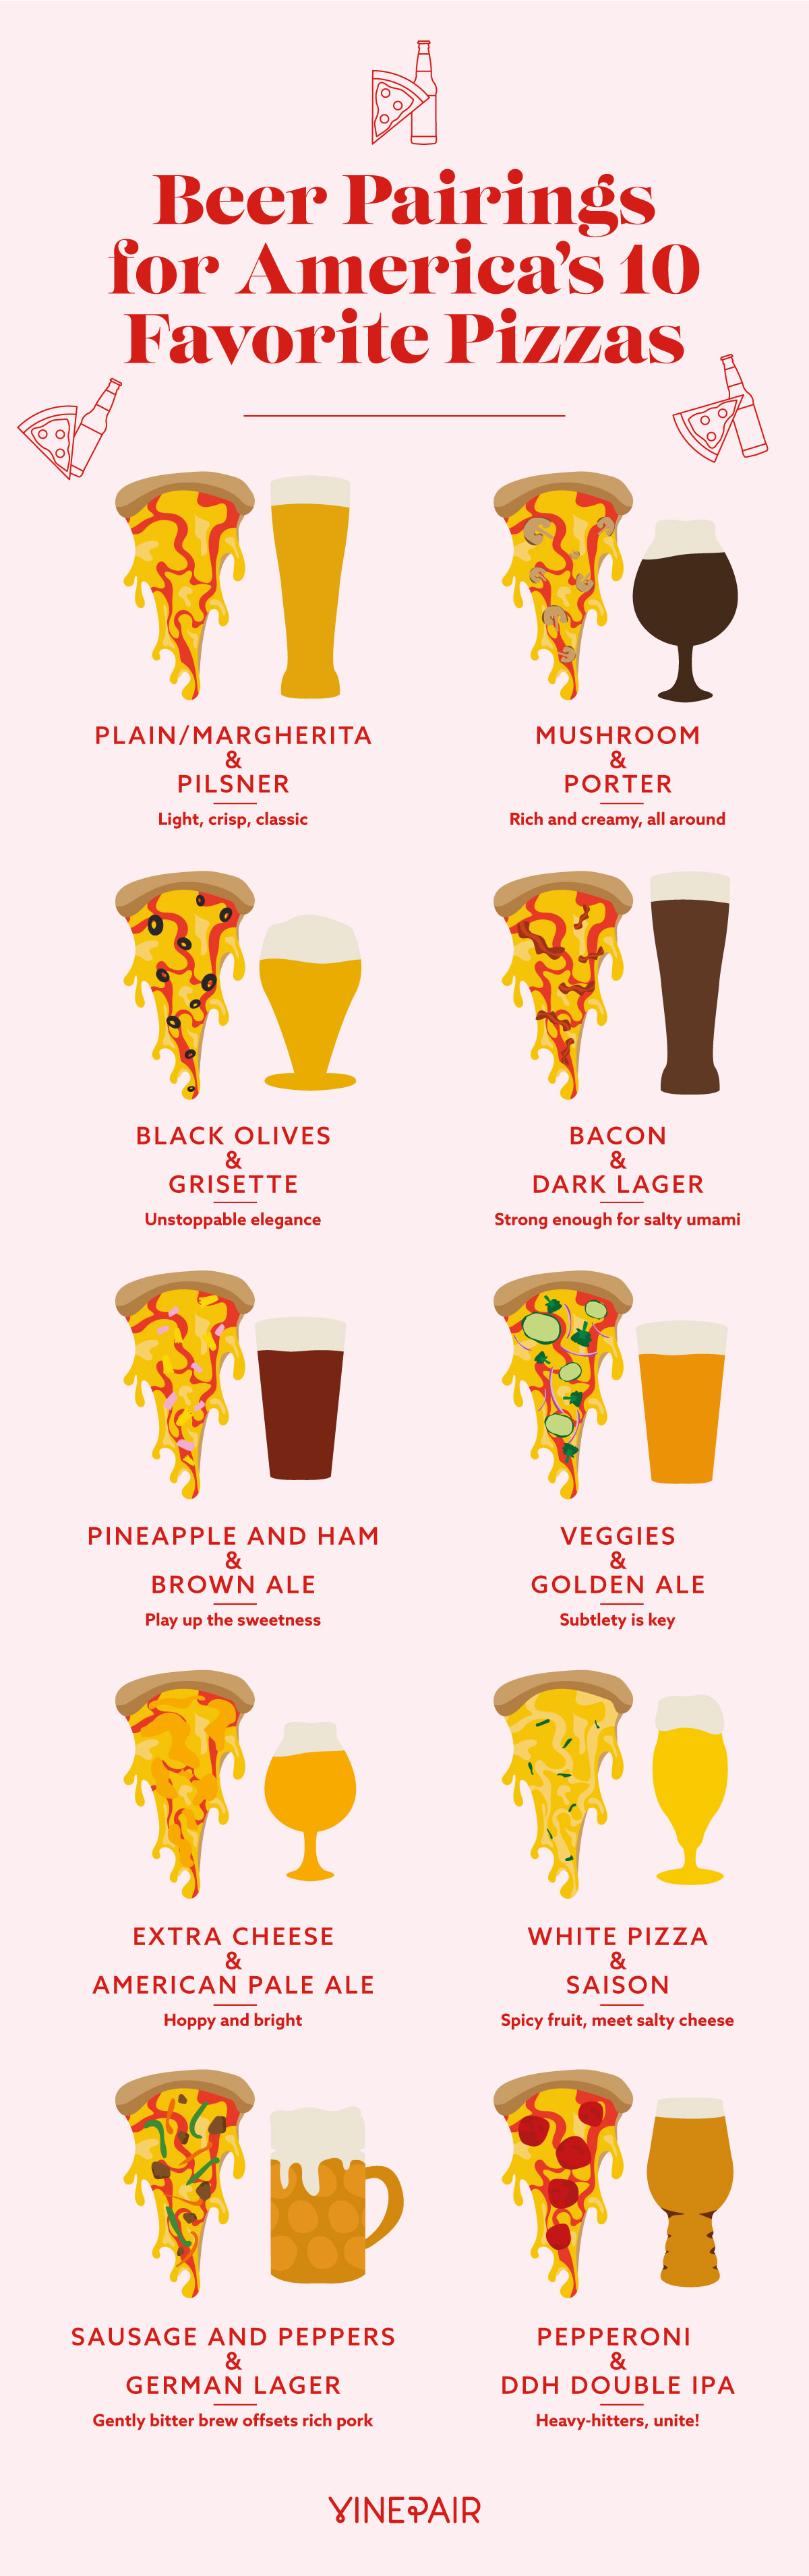 Best Beer And Pizza Pairings for America's 10 Favorite Pizza Styles